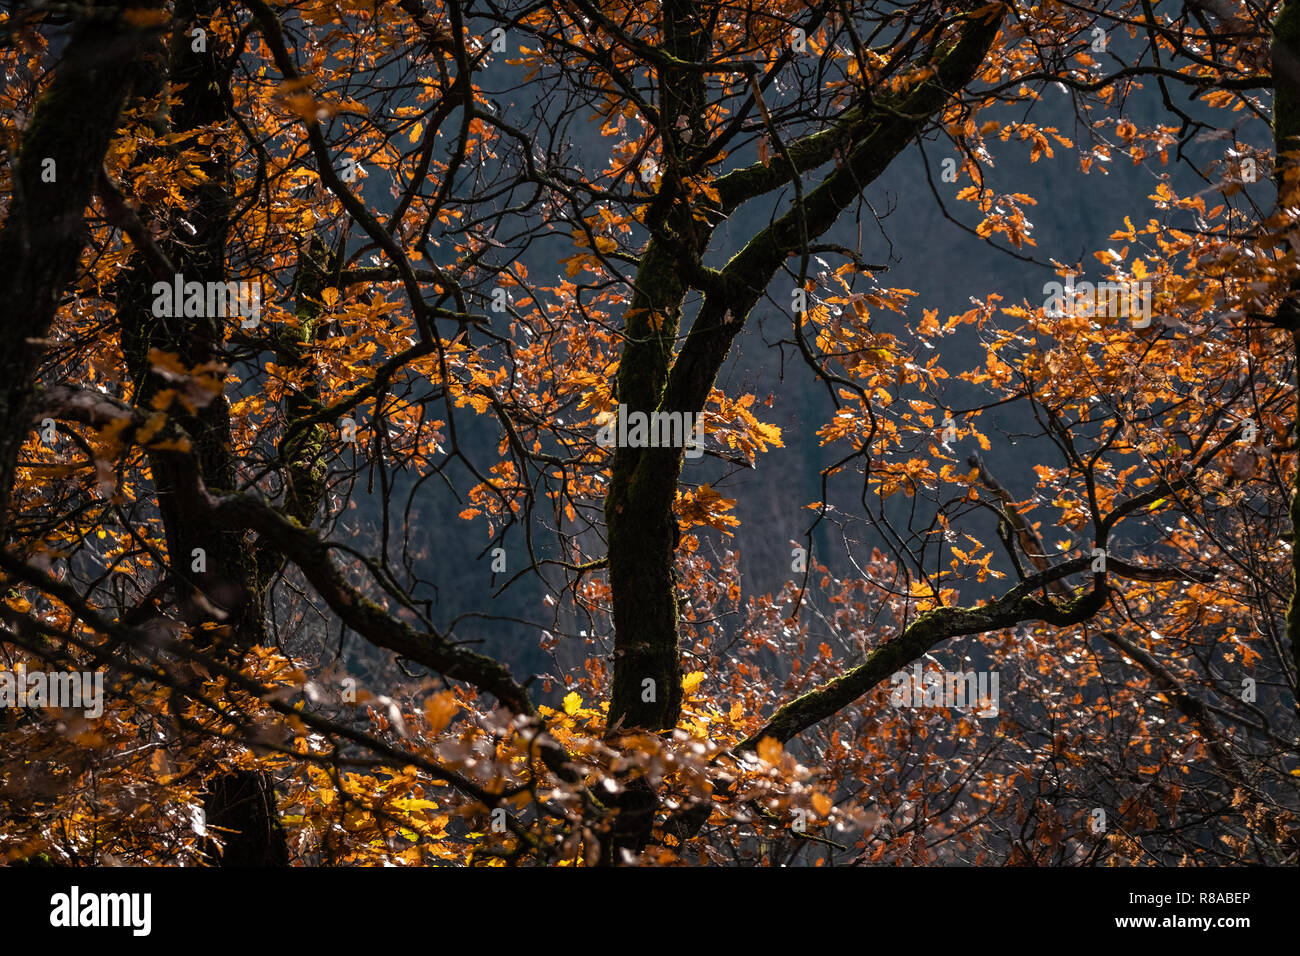 Autumnal forest. Leaves of yellow and orange colors in the branches of trees Stock Photo